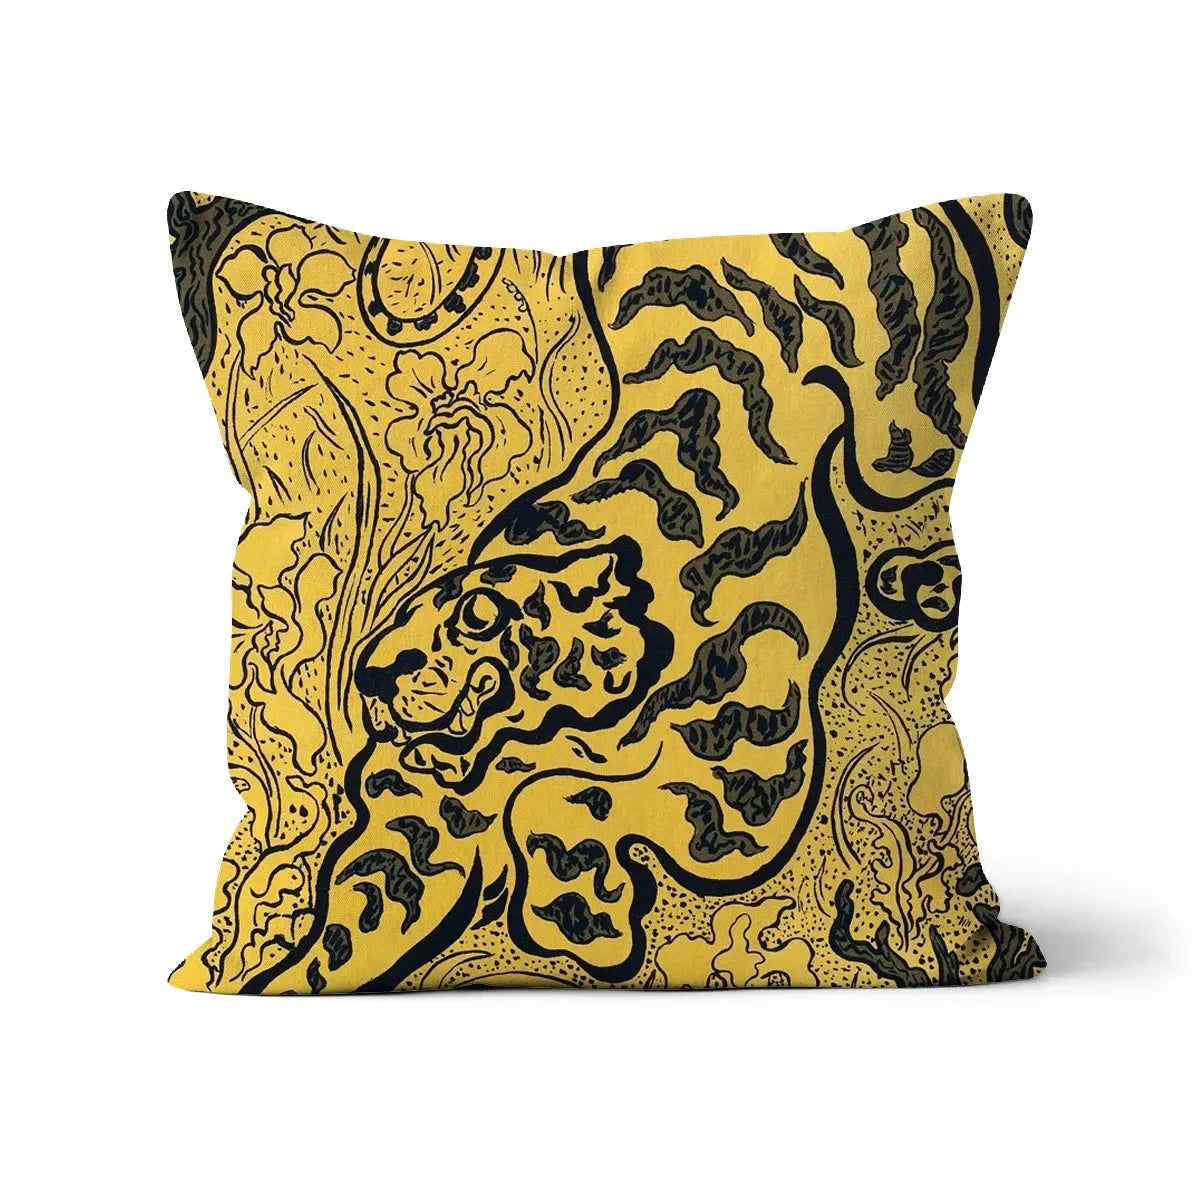 Tiger In The Jungle By Paul Ranson Cushion - Linen / 16’x16’ - Throw Pillows - Aesthetic Art